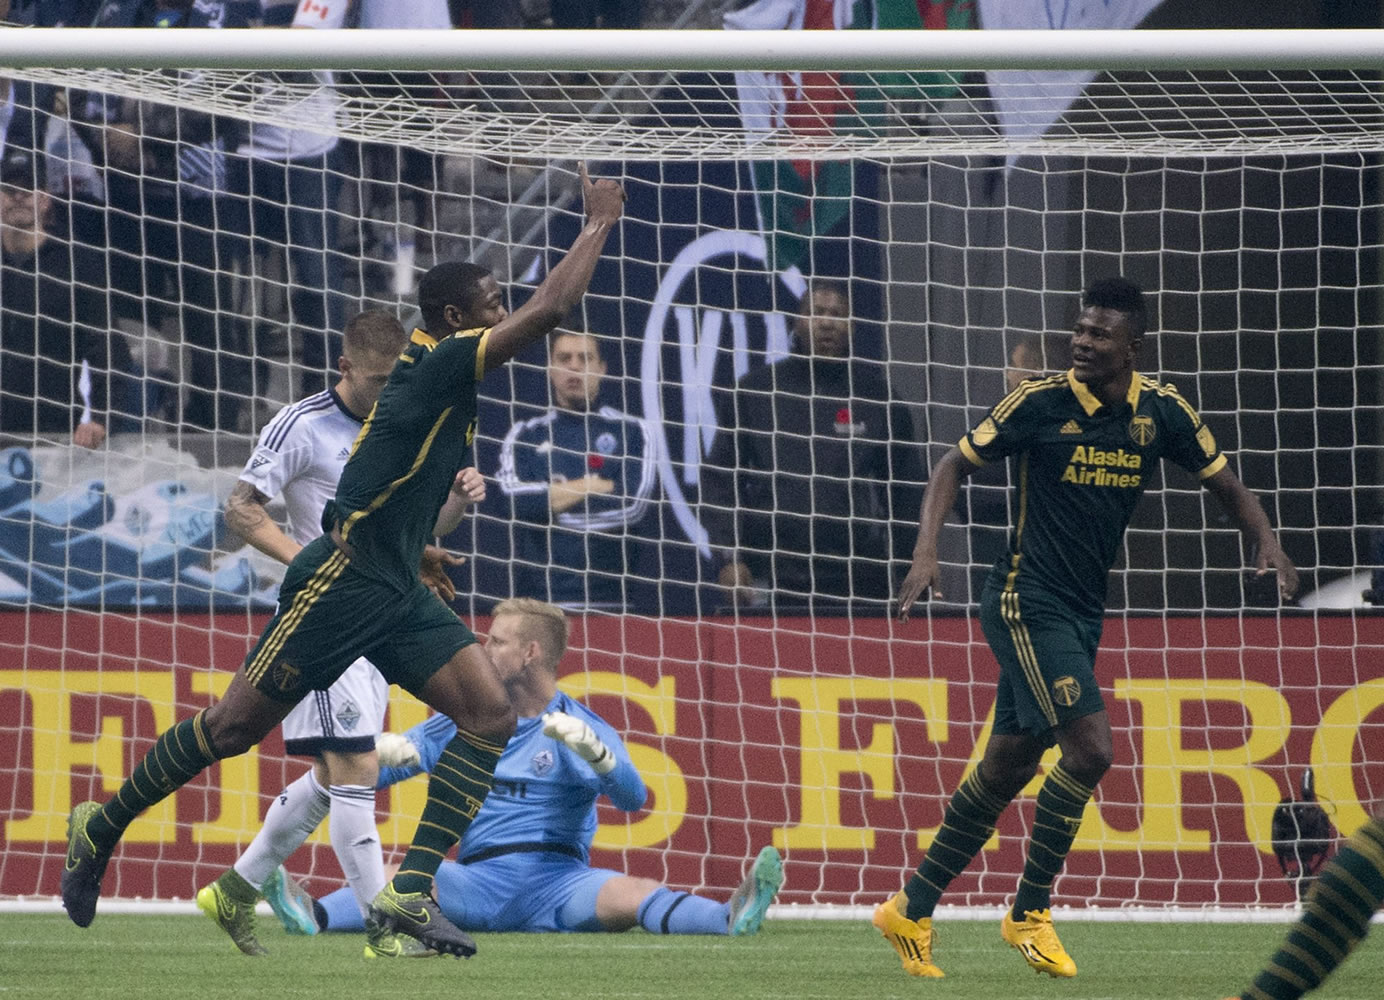 Portland Timbers FC Fanendo Adi (9) celebrates his goal past Vancouver Whitecaps goalkeeper David Ousted (1) during the first half of MLS soccer action in Vancouver, British Columbia, Canada, Sunday, Nov. 8, 2015.